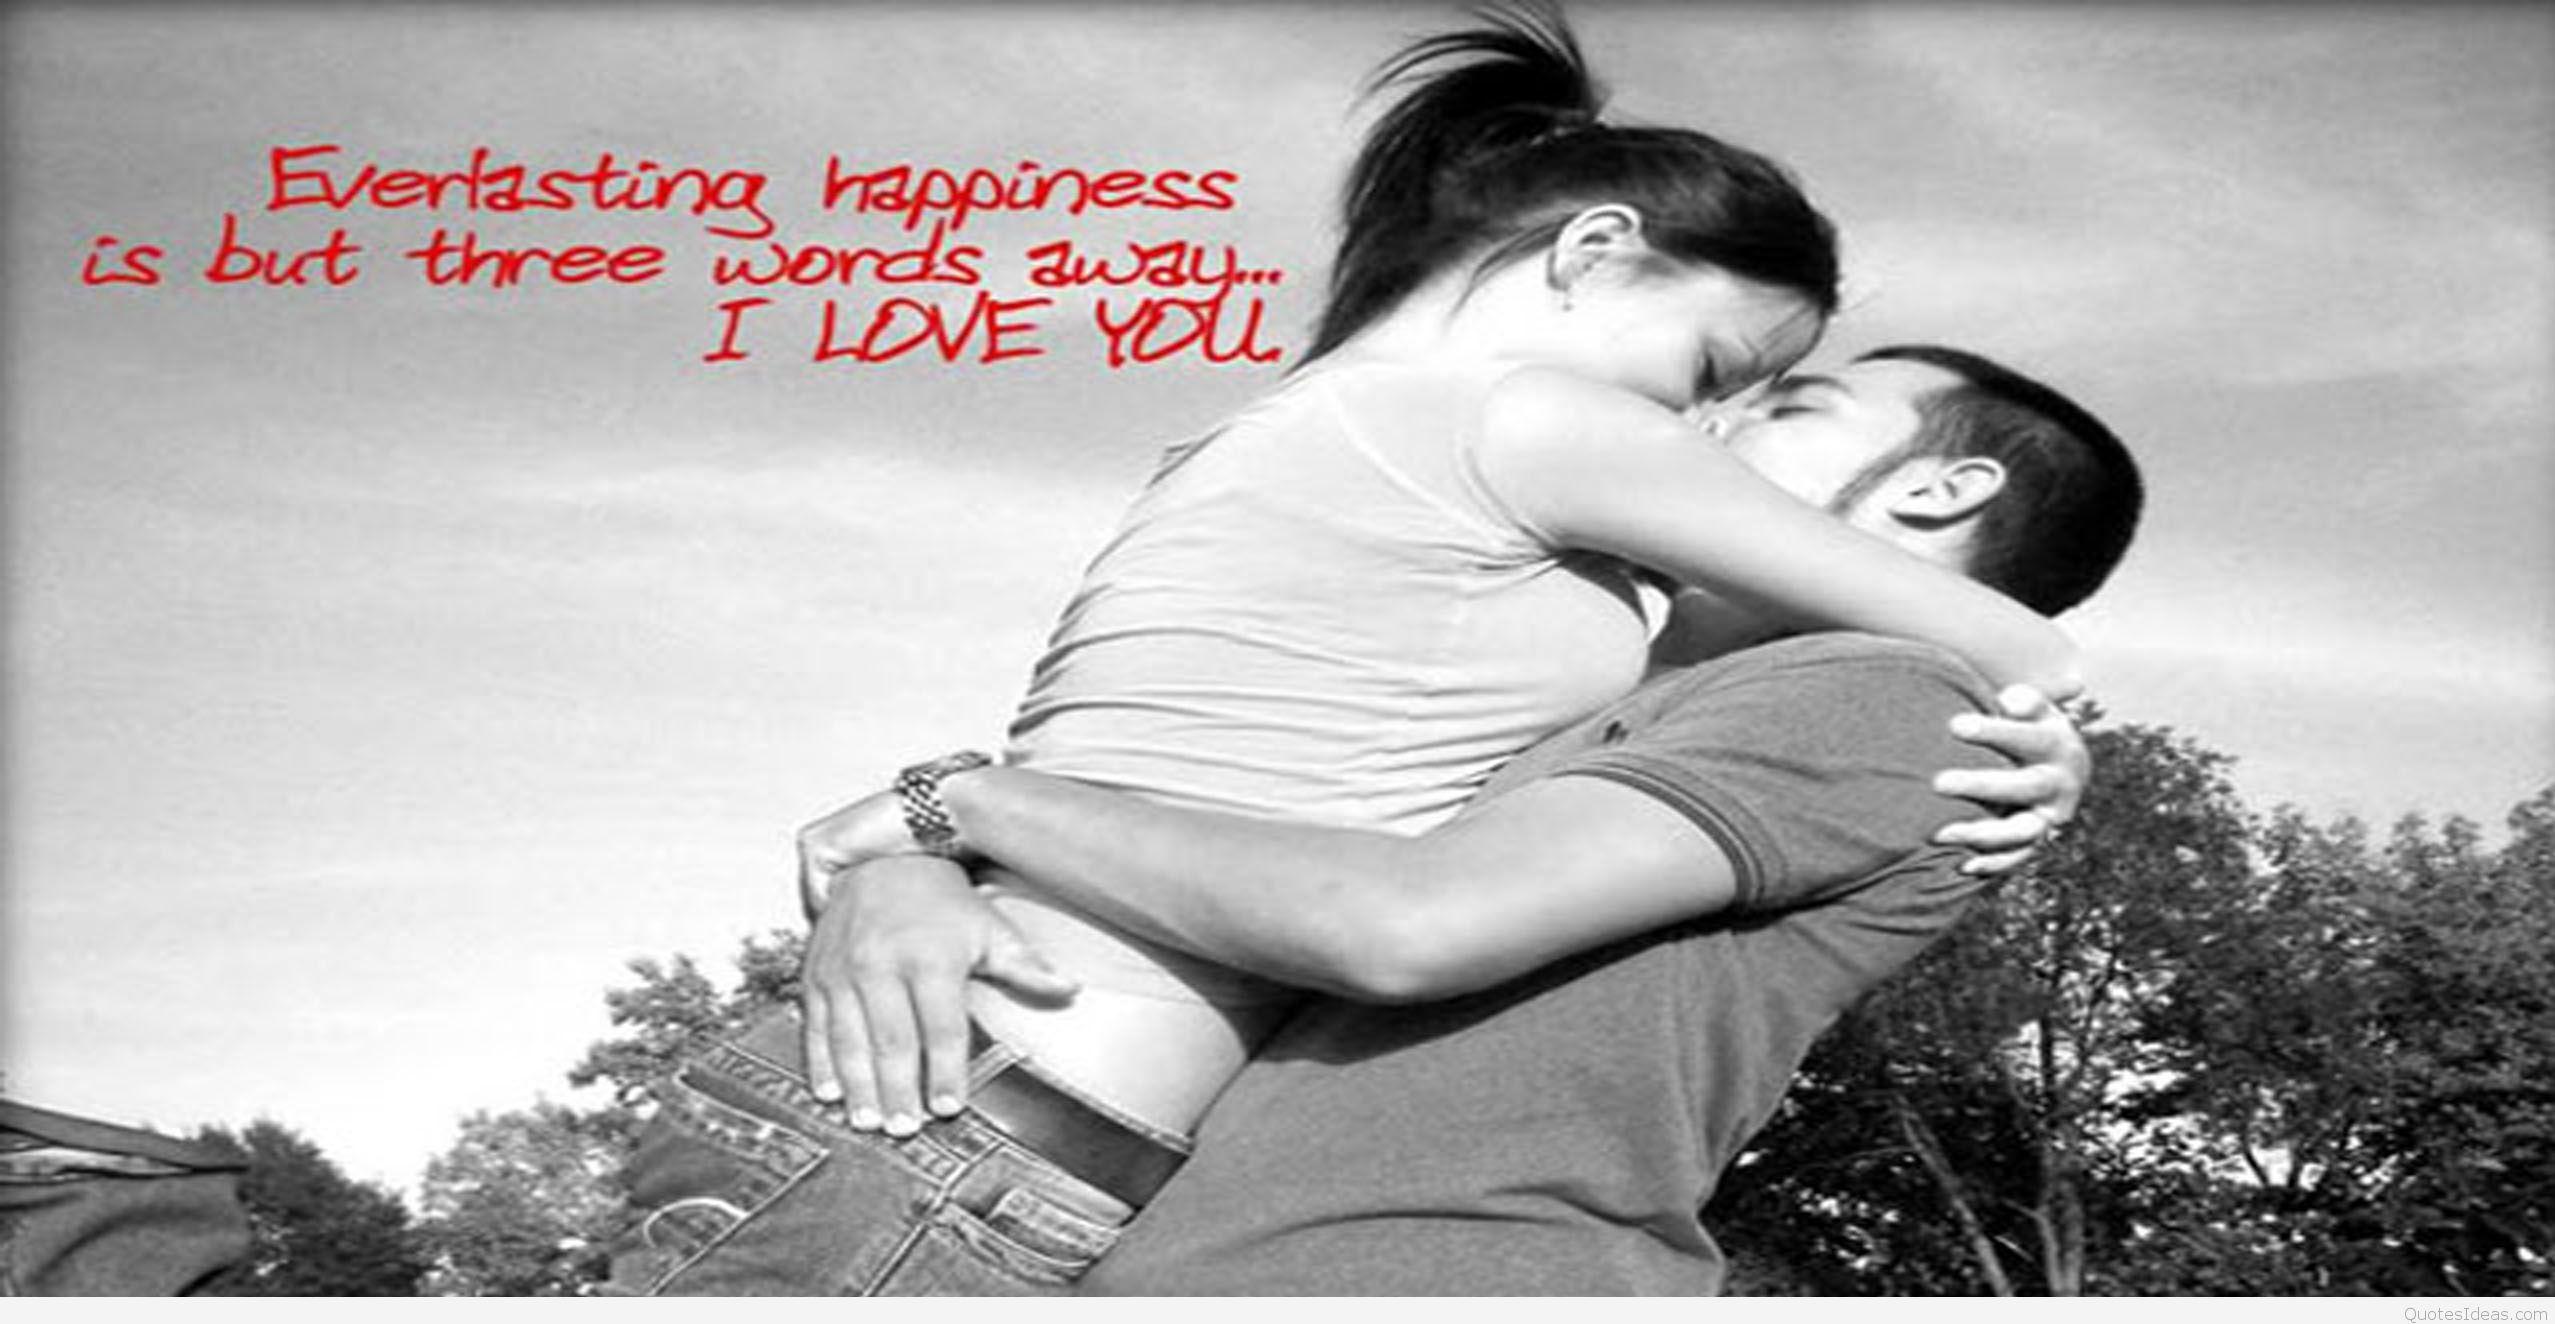 Love Hug Image With Quotes Hindi Amazing Hindi Love Quotes With